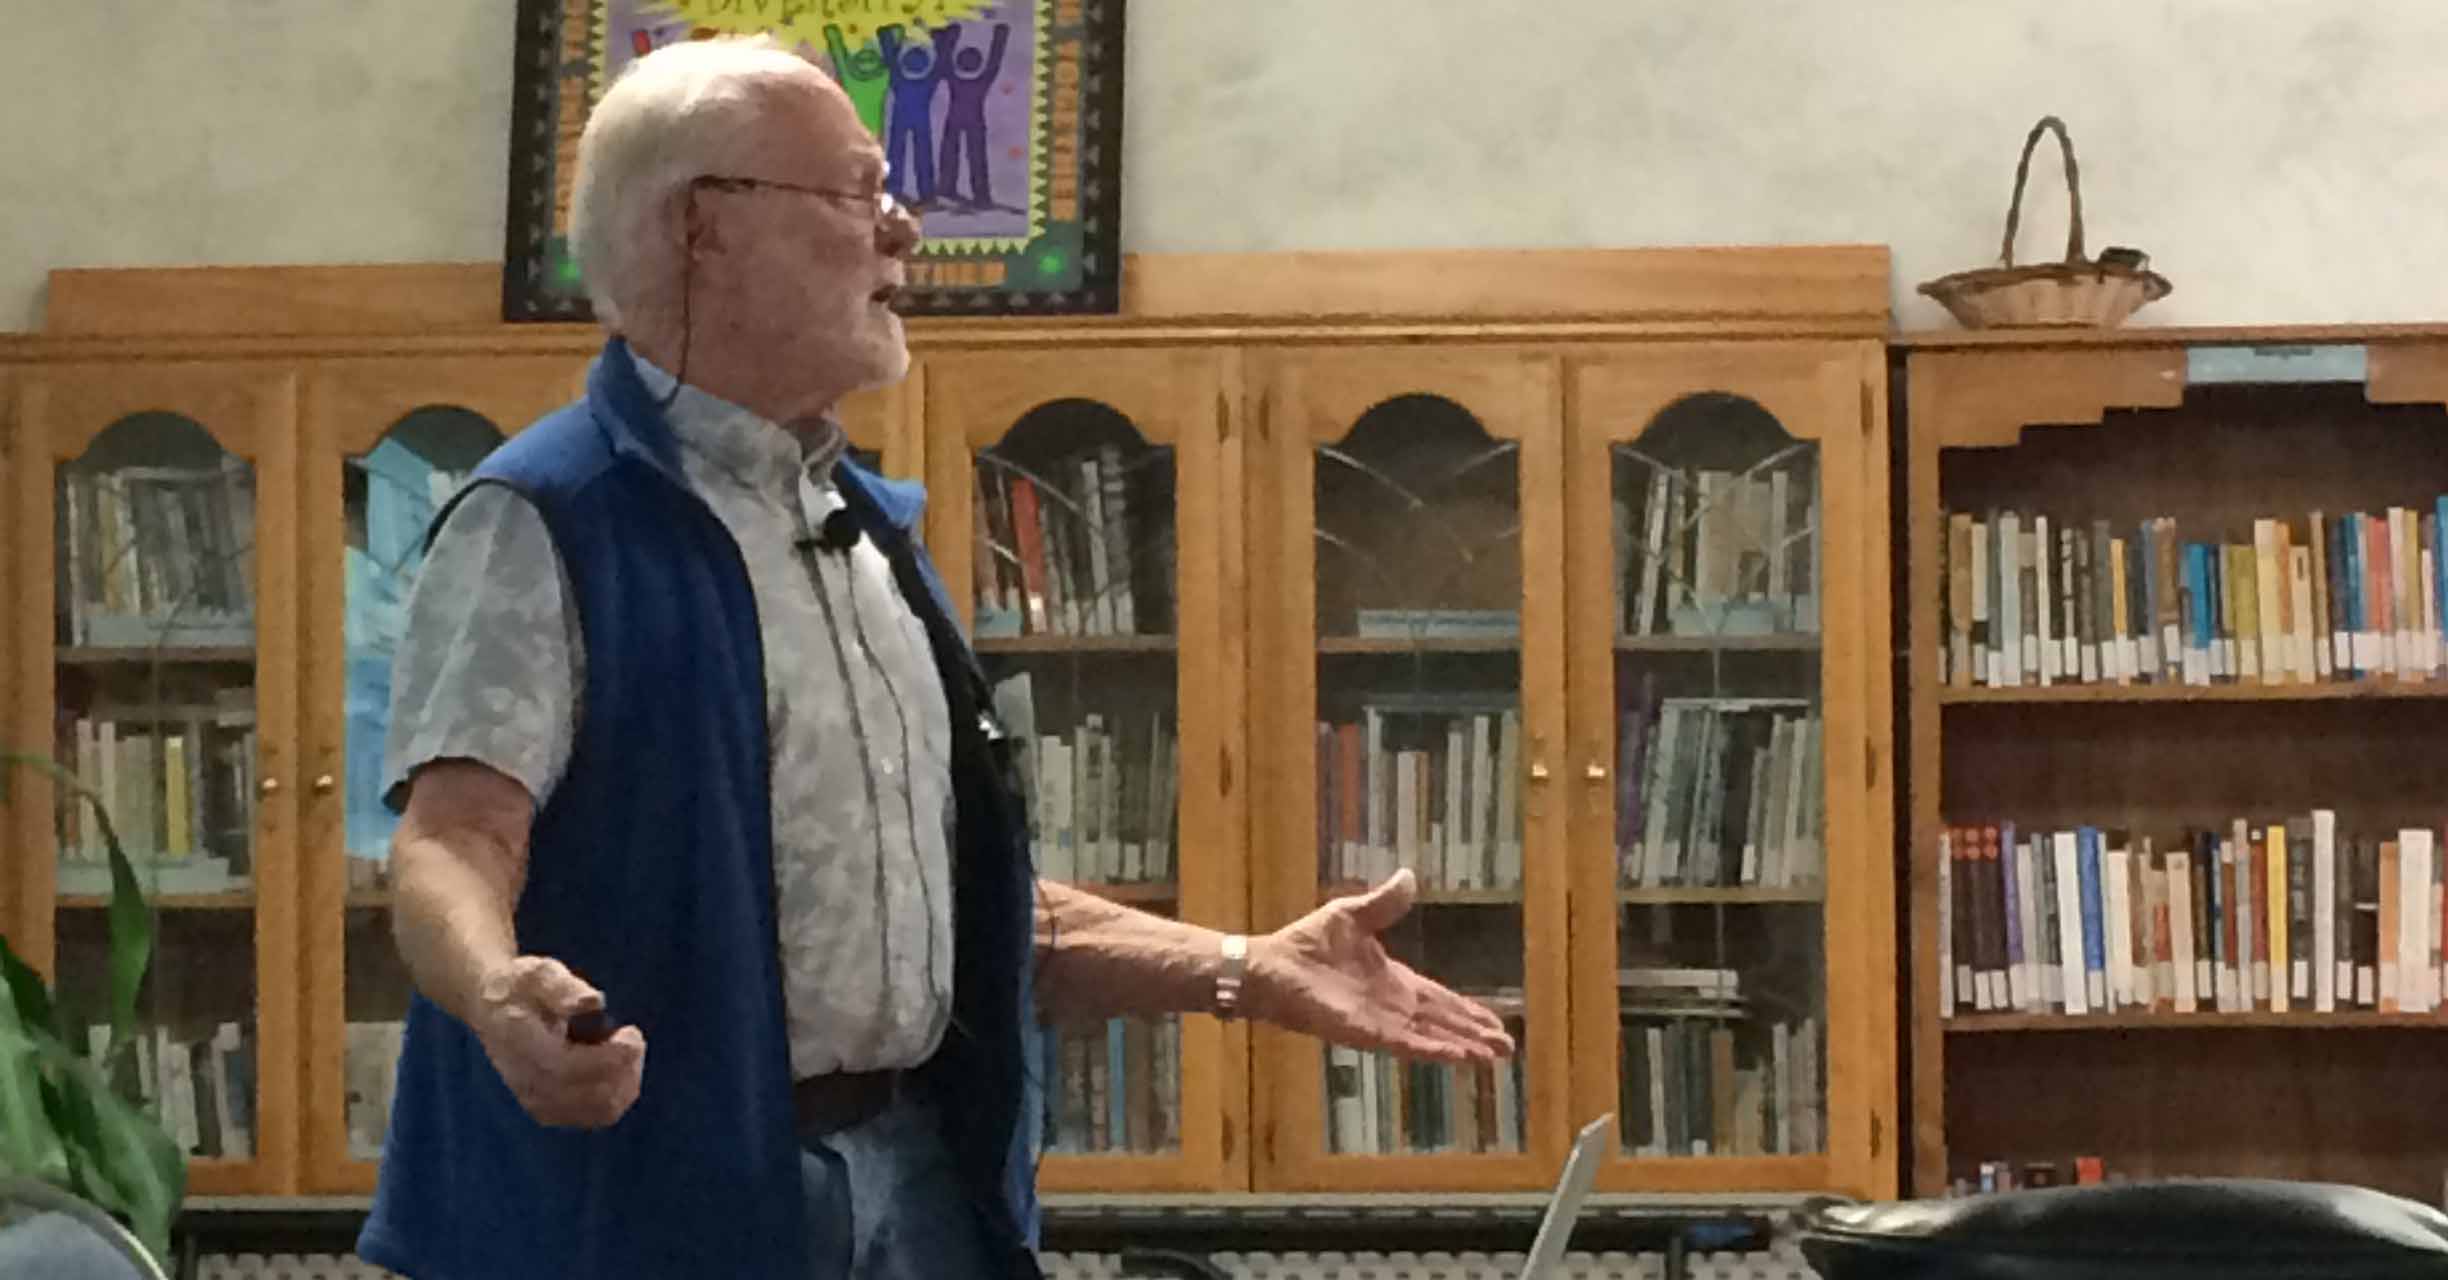 Water advocate talks declining aquifer; groundwater pumping not sole cause - Prescott Daily Courier